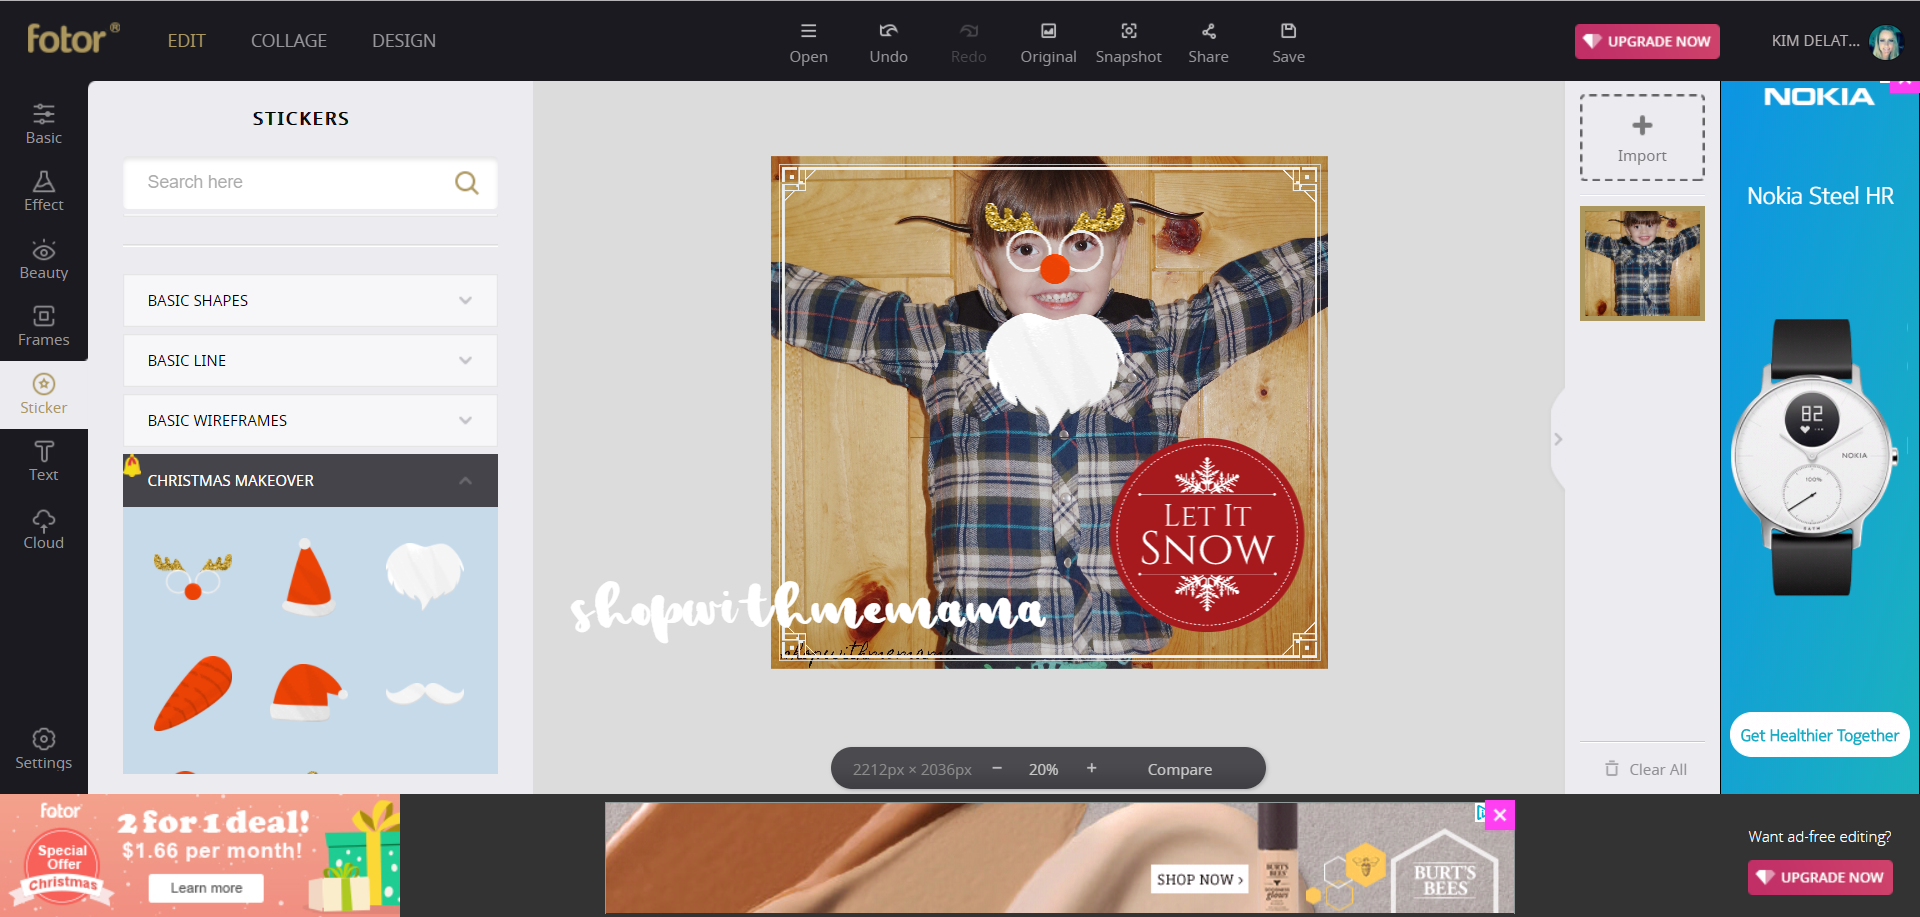 Create Beautiful Collages, Edit Photos, Design Graphics And More With Fotor